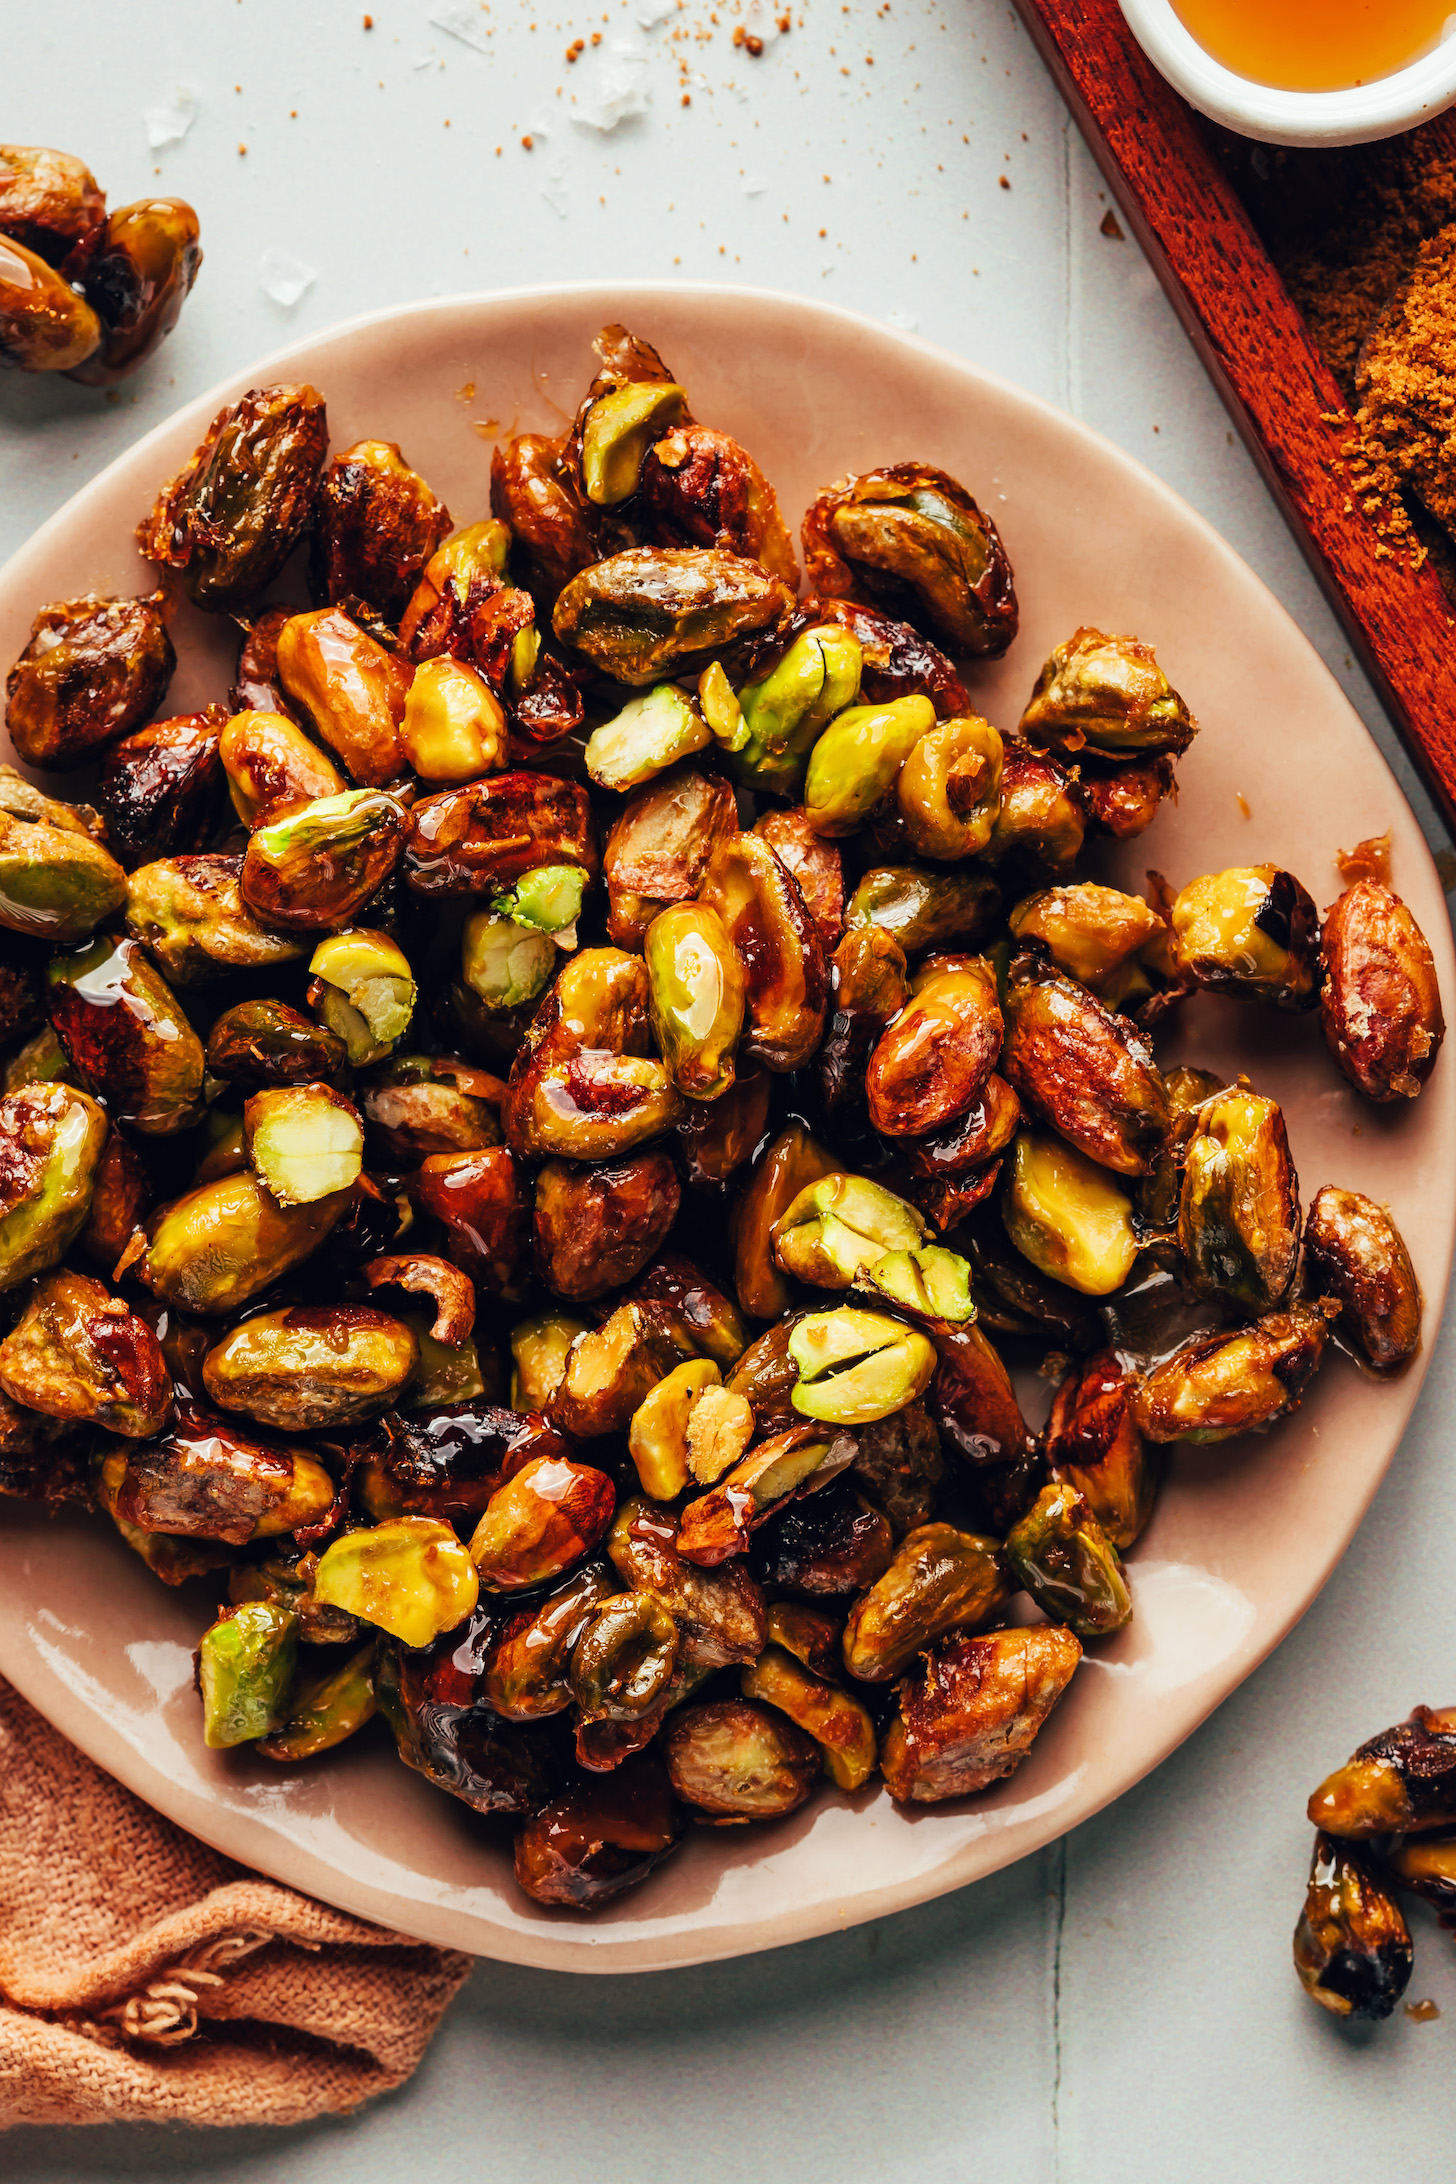 Plate of crispy homemade candied pistachios